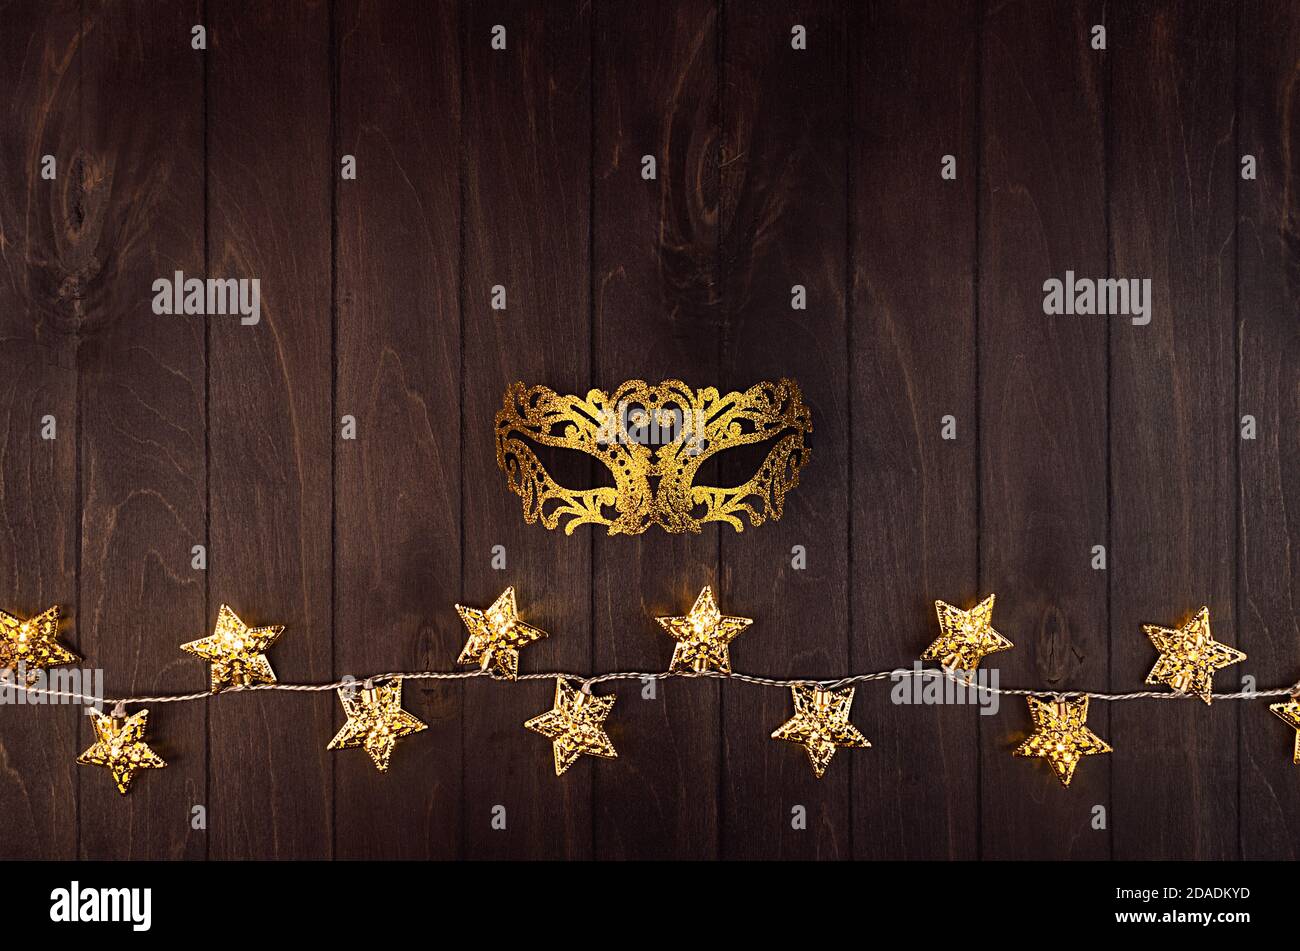 Masquerade decorations on dark wooden background Stock Photo by